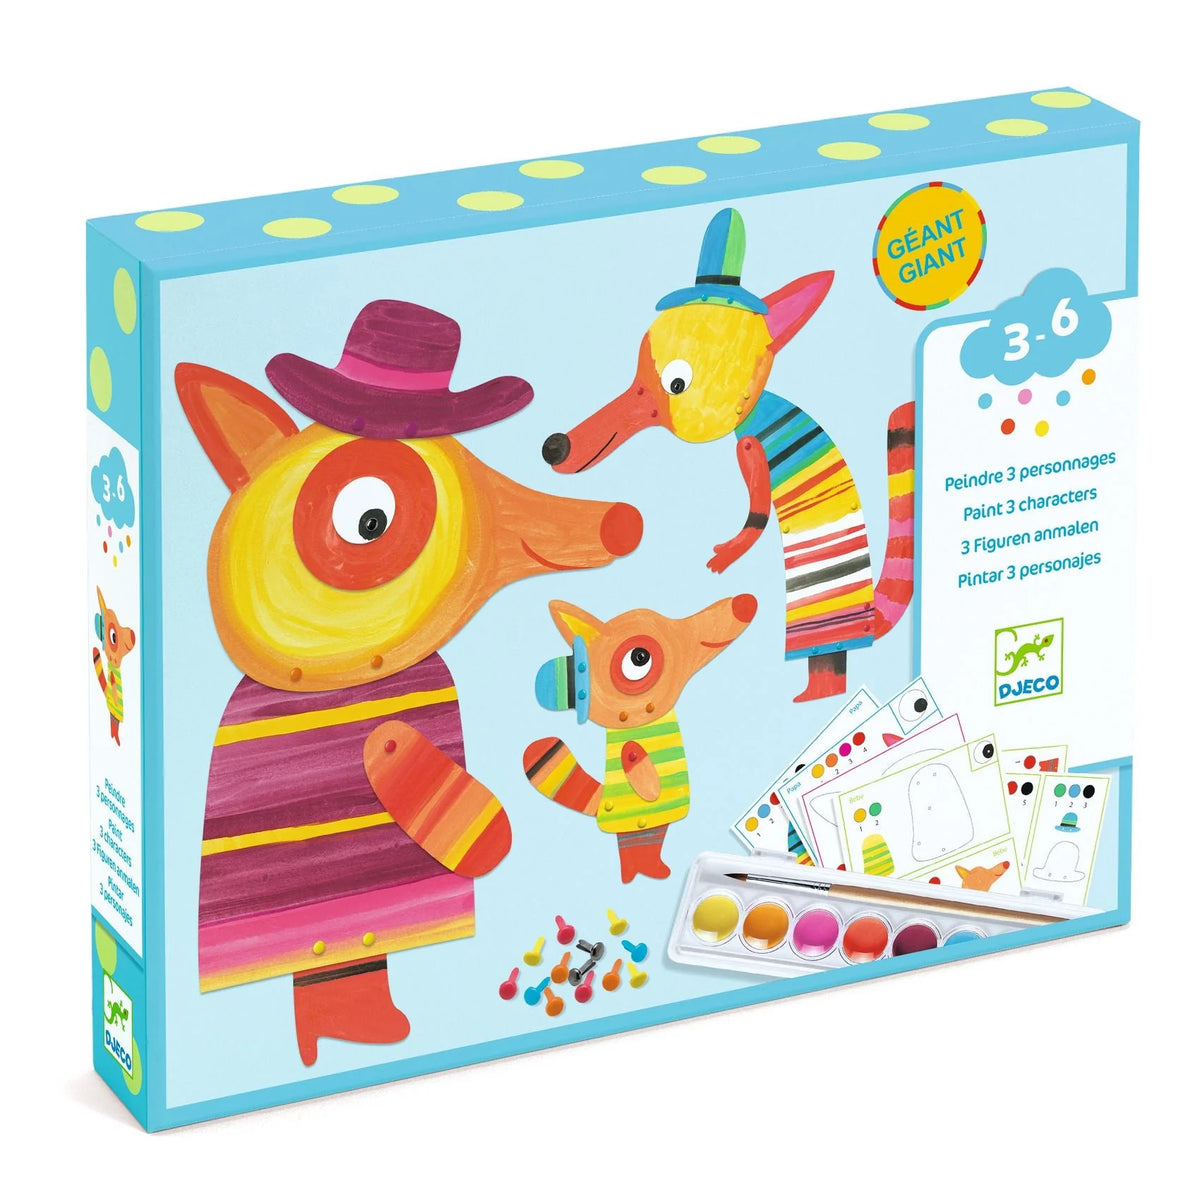 The Fox Family Painting Set